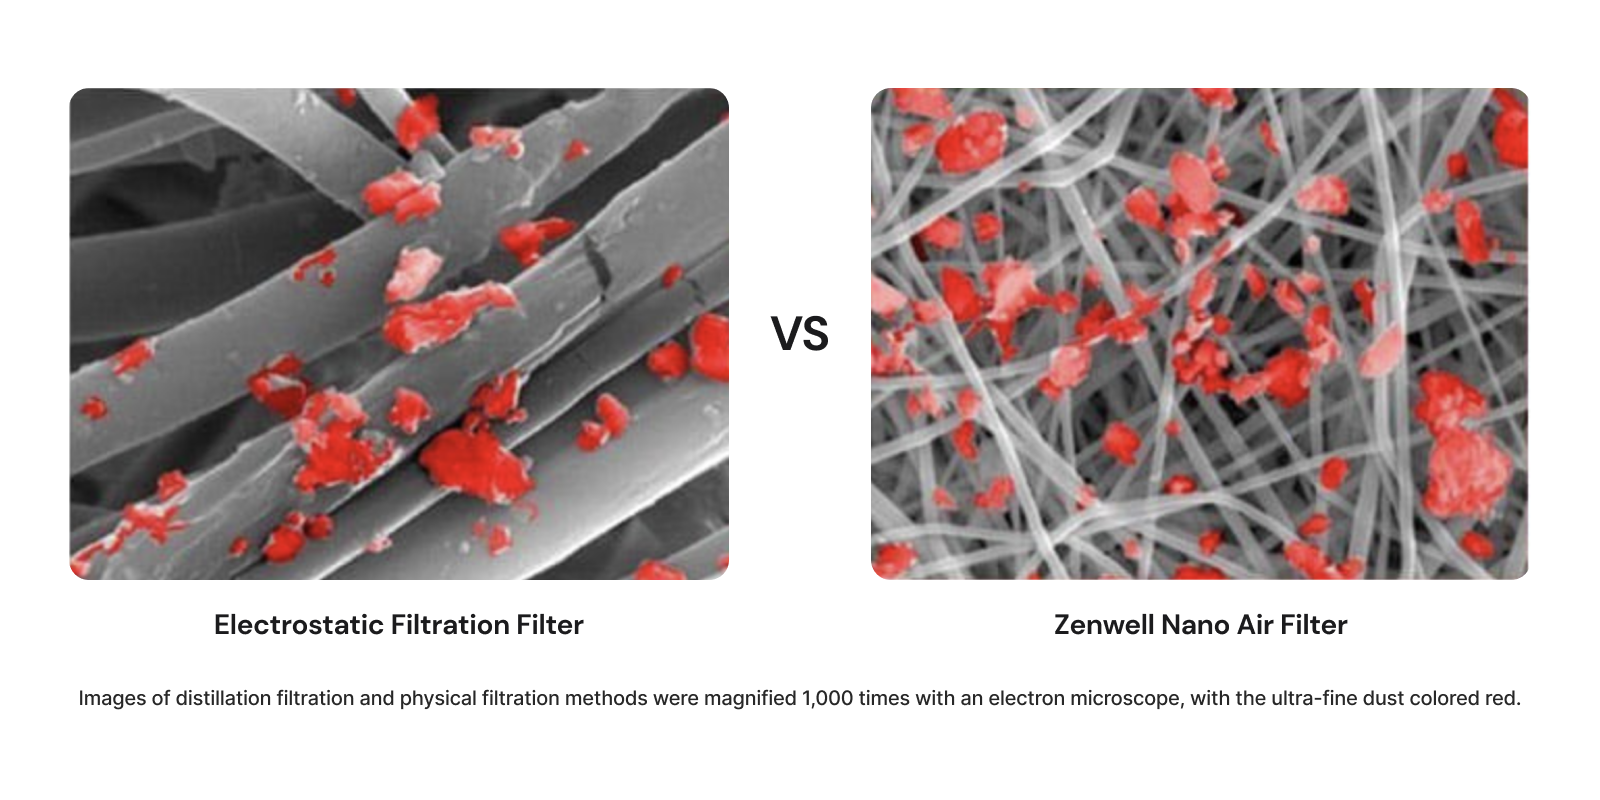 Pictures of electrostatic filtration filter and Zenwell Nano Air Filter with red ultra-fine dust particles magnified 1000 times with an electron microscope to show how more tightly knit and compact the nano air filter is